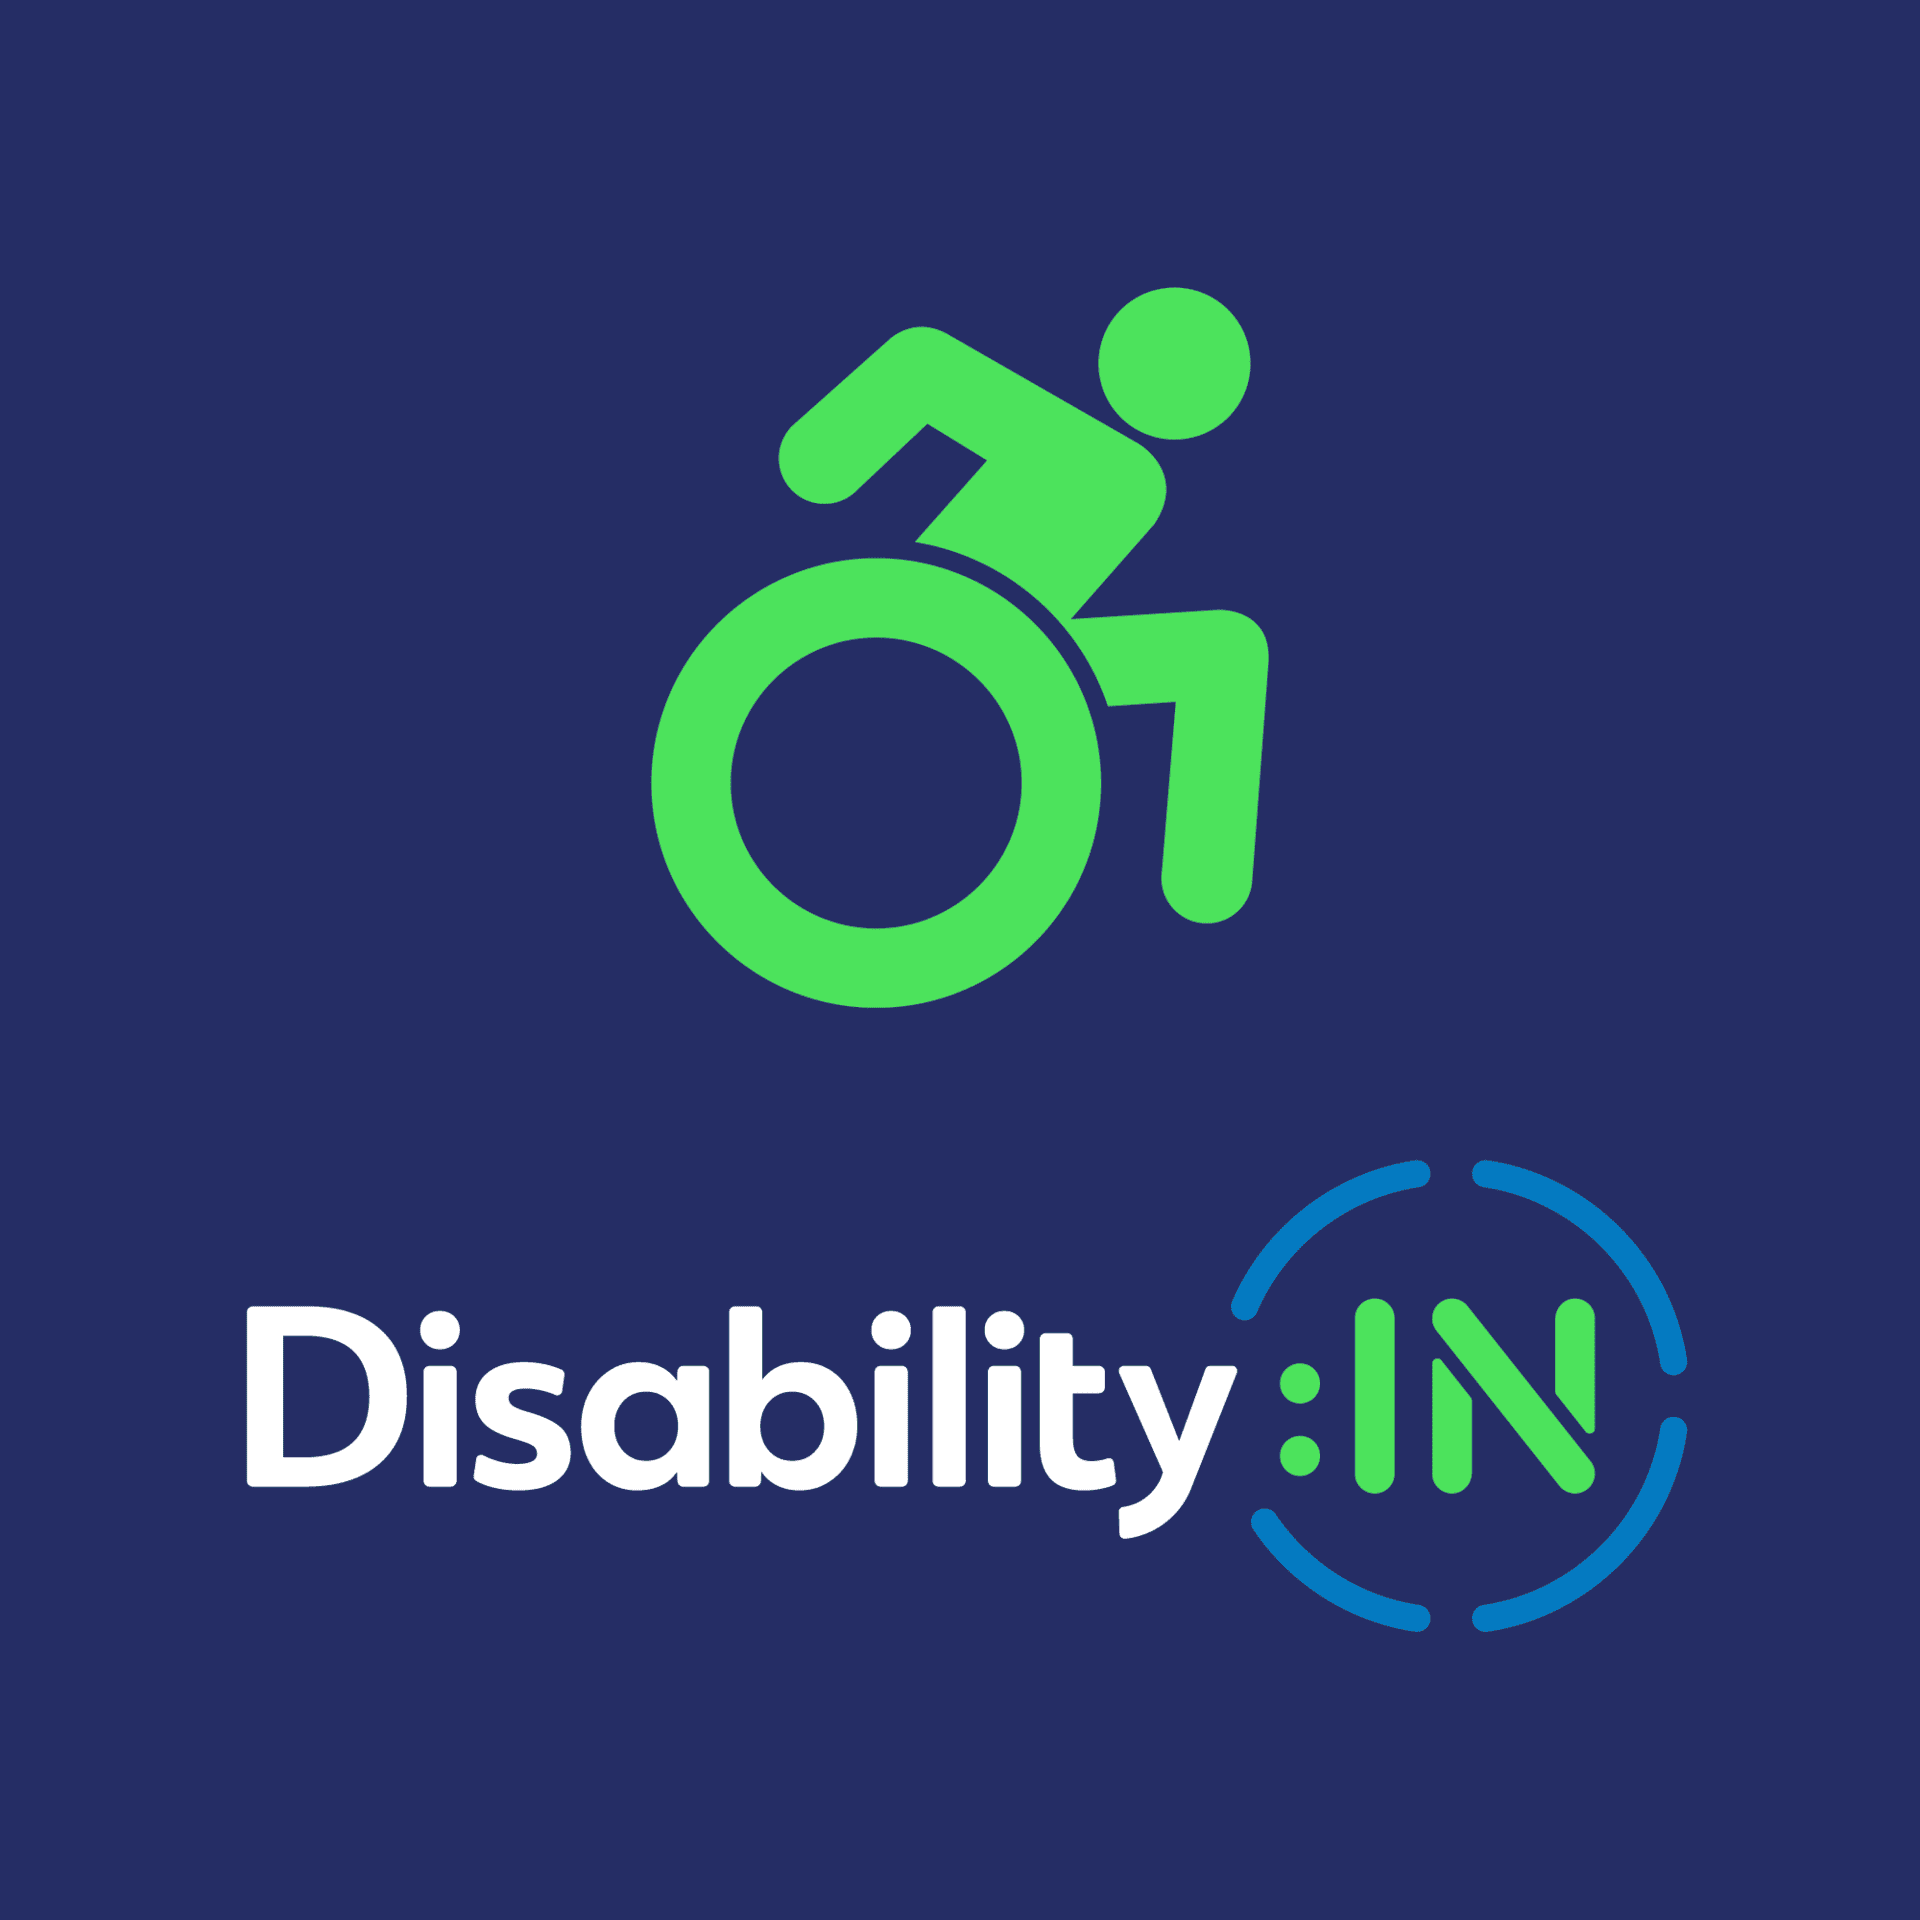 Disability in logo on a blue background.